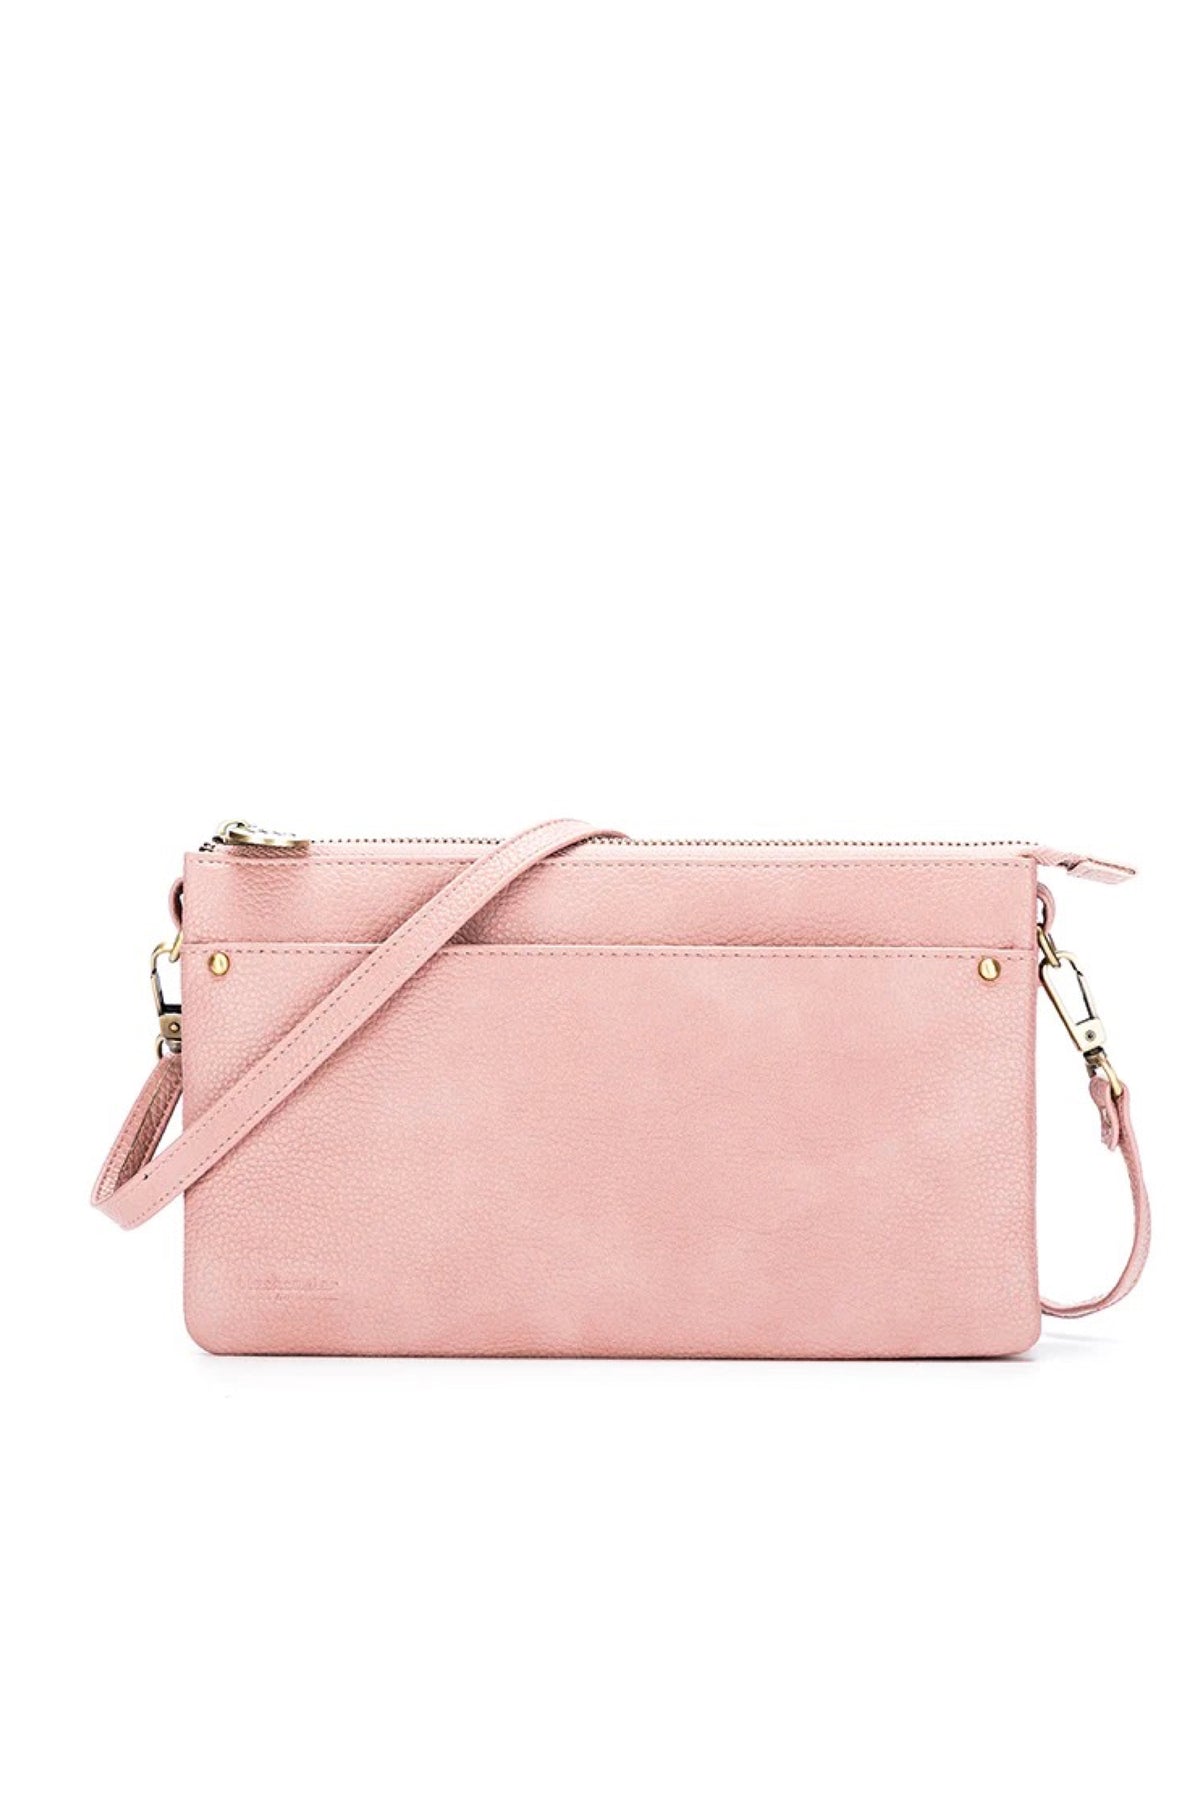 Millie Bag Pretty In Pink